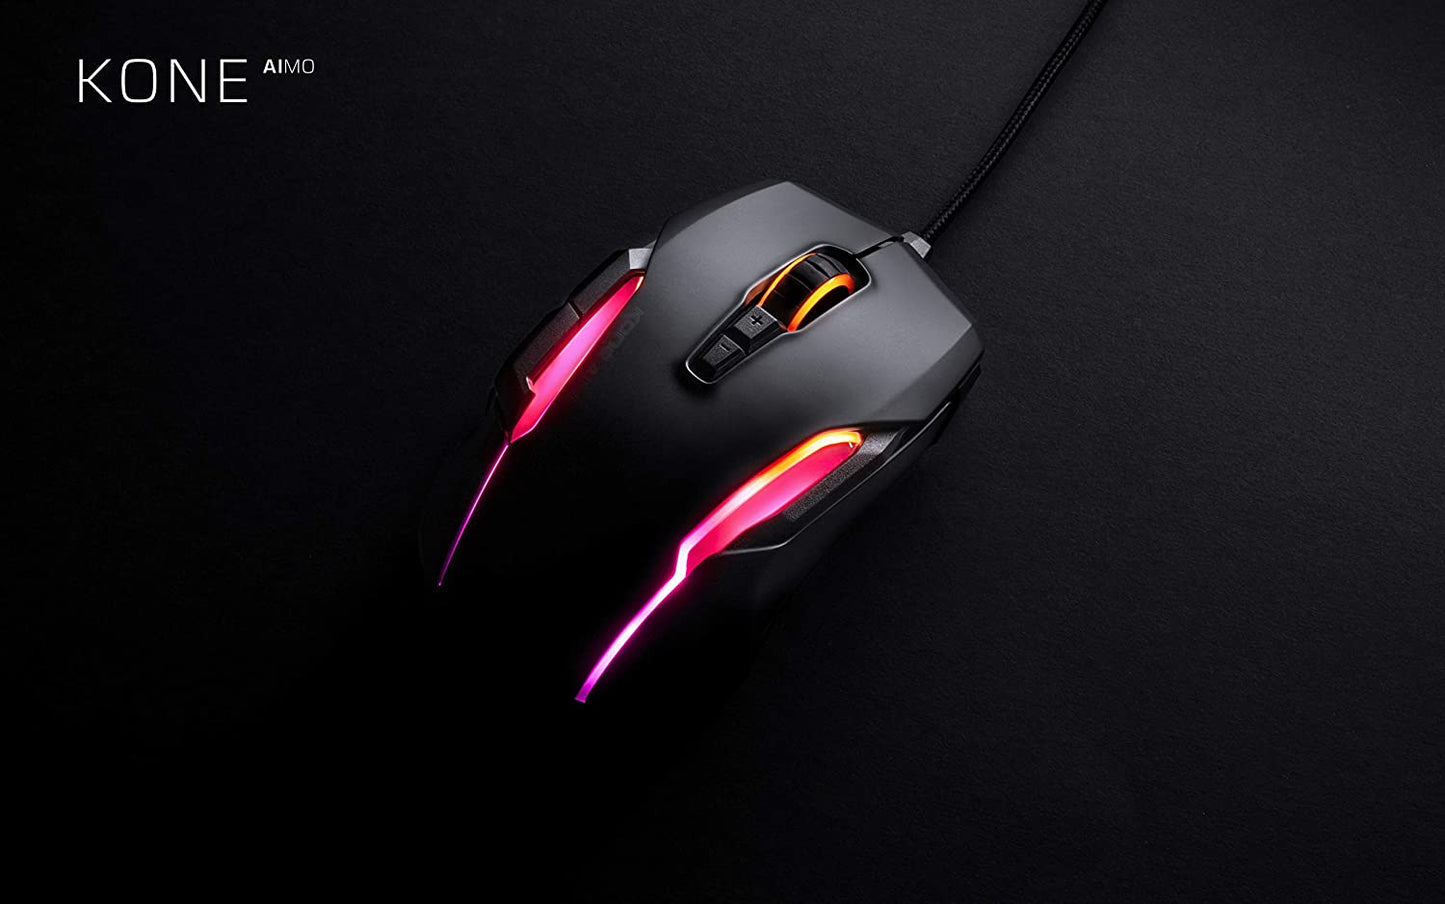 ROCCAT Kone AIMO Gaming USB Mouse - Black-remastered